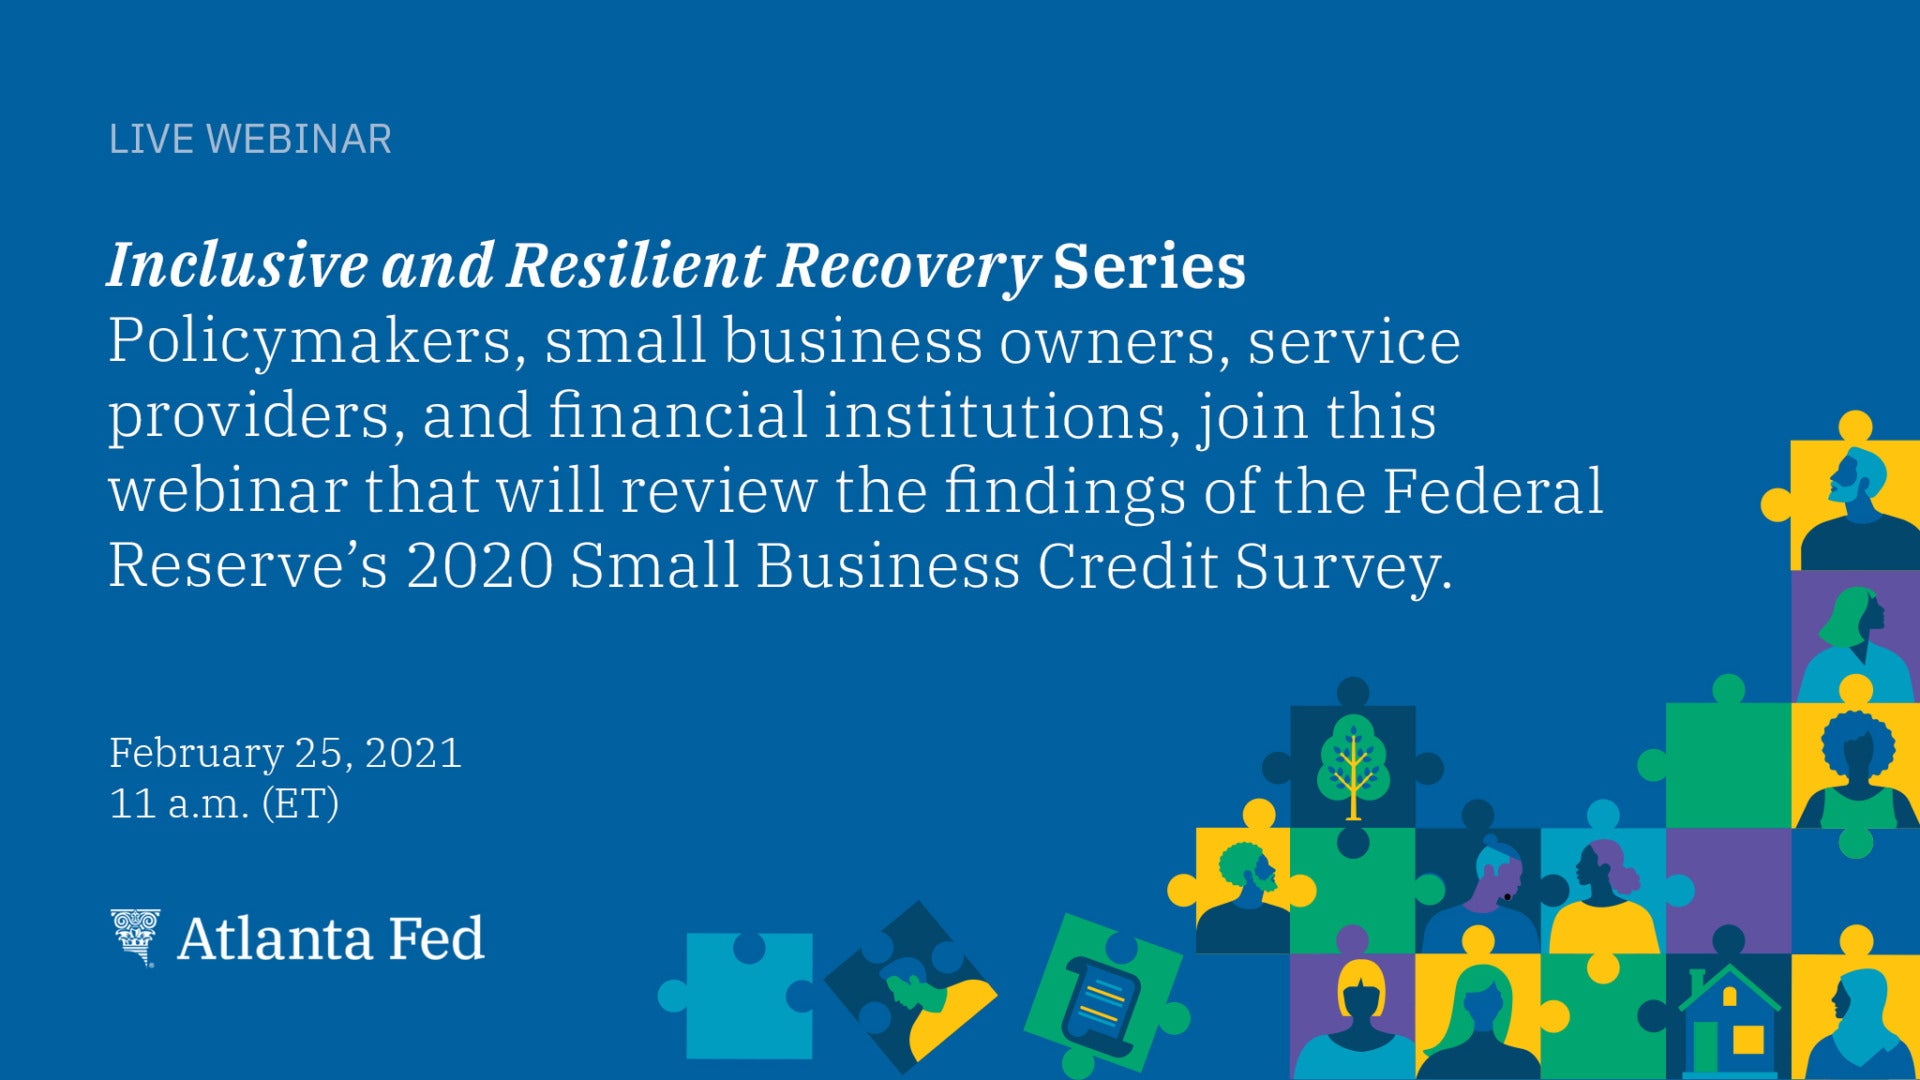 Live Webinar. Inclusive and Resilient Recovery Series. Policymakers, small business owners, service providers, and financial institutions, join this webinar that will review the findings of the Federal Reserve's 2020 Small Business Credit Survey. February 25, 2021. 11 a.m. (ET). Atlanta Fed.